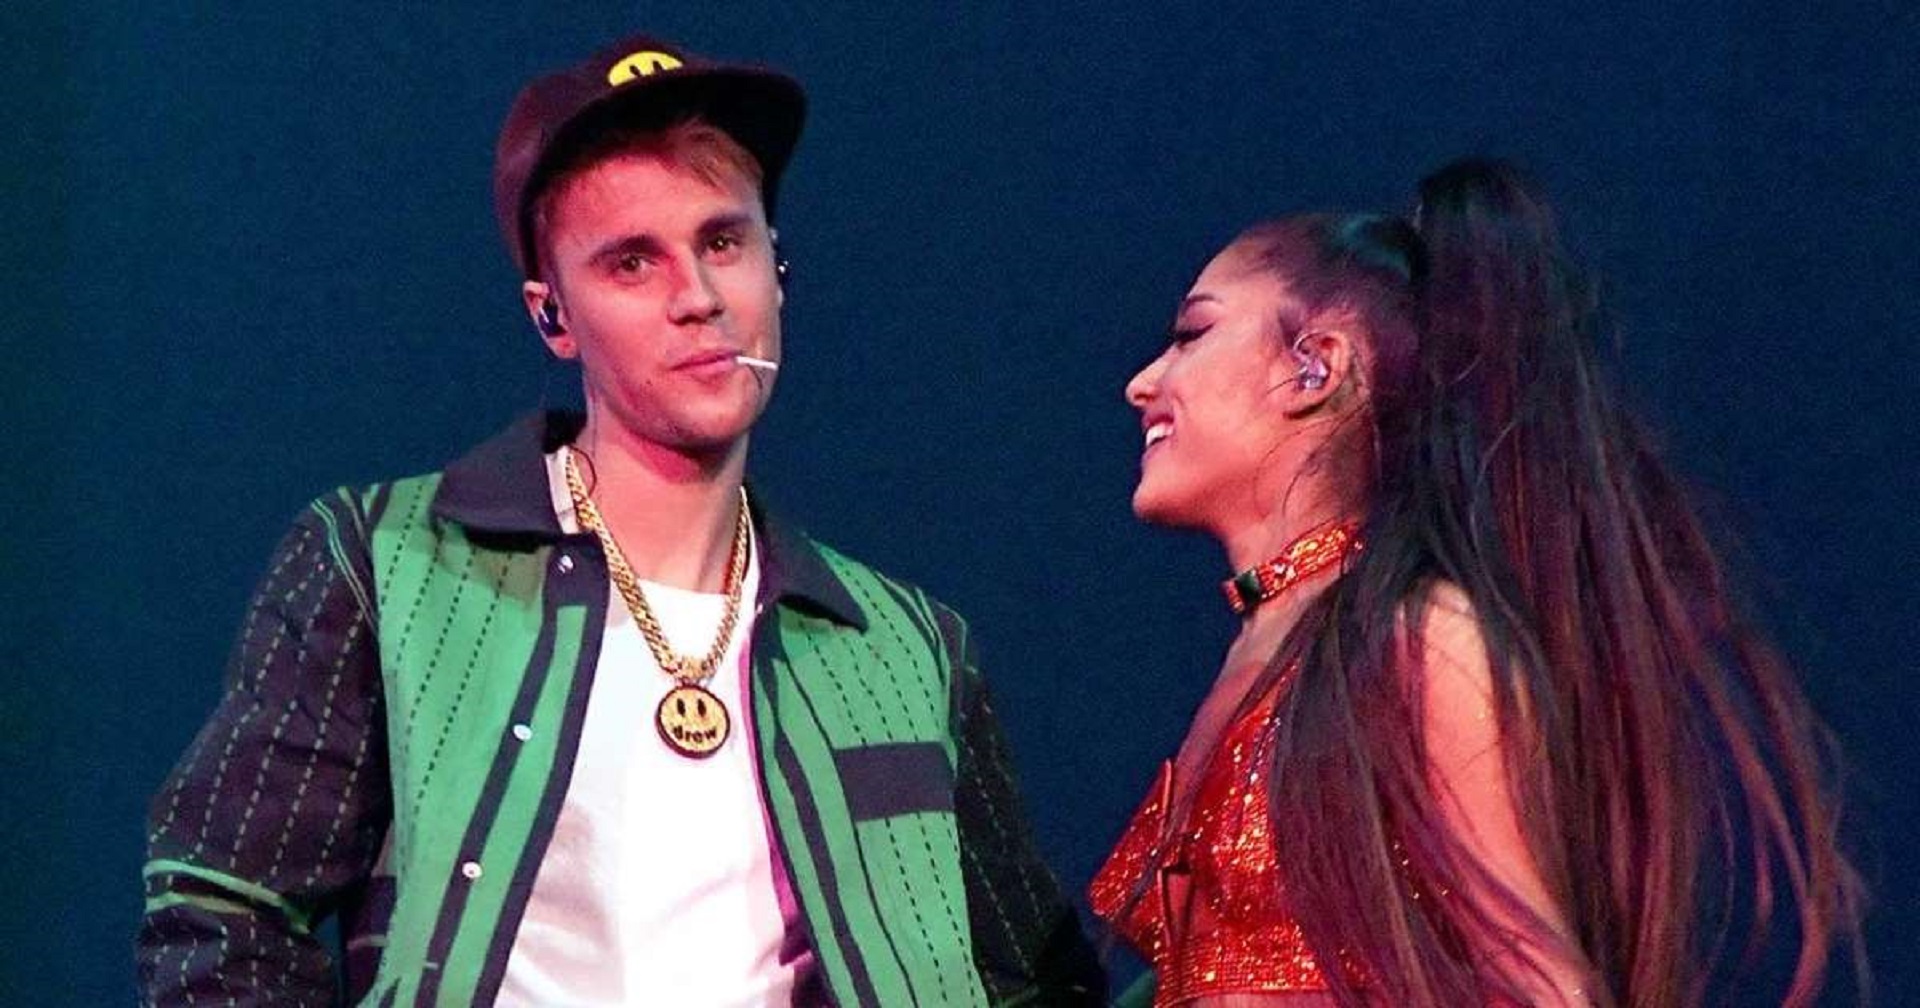 Surprise! Justin Bieber and Ariana Grande Announce New Duet – ‘Stuck With U’